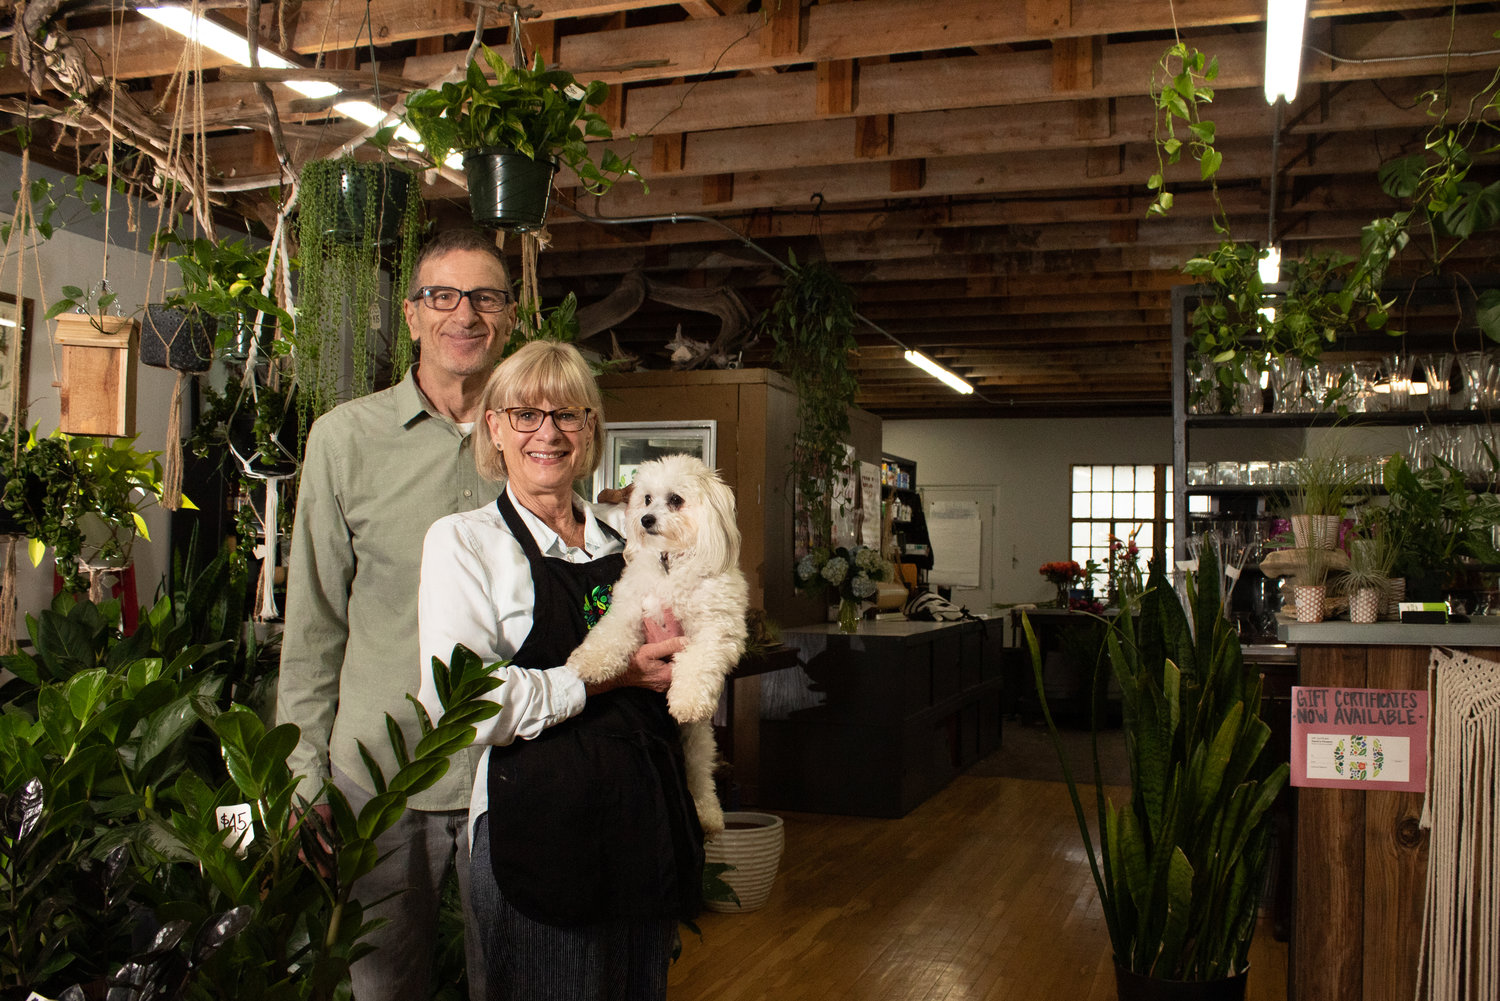 GROWTH MODE: Jeff Van Haveren and Shelley Hume own Hazel's Flowers, an Ozark business that increased sales by $100,000 last year.